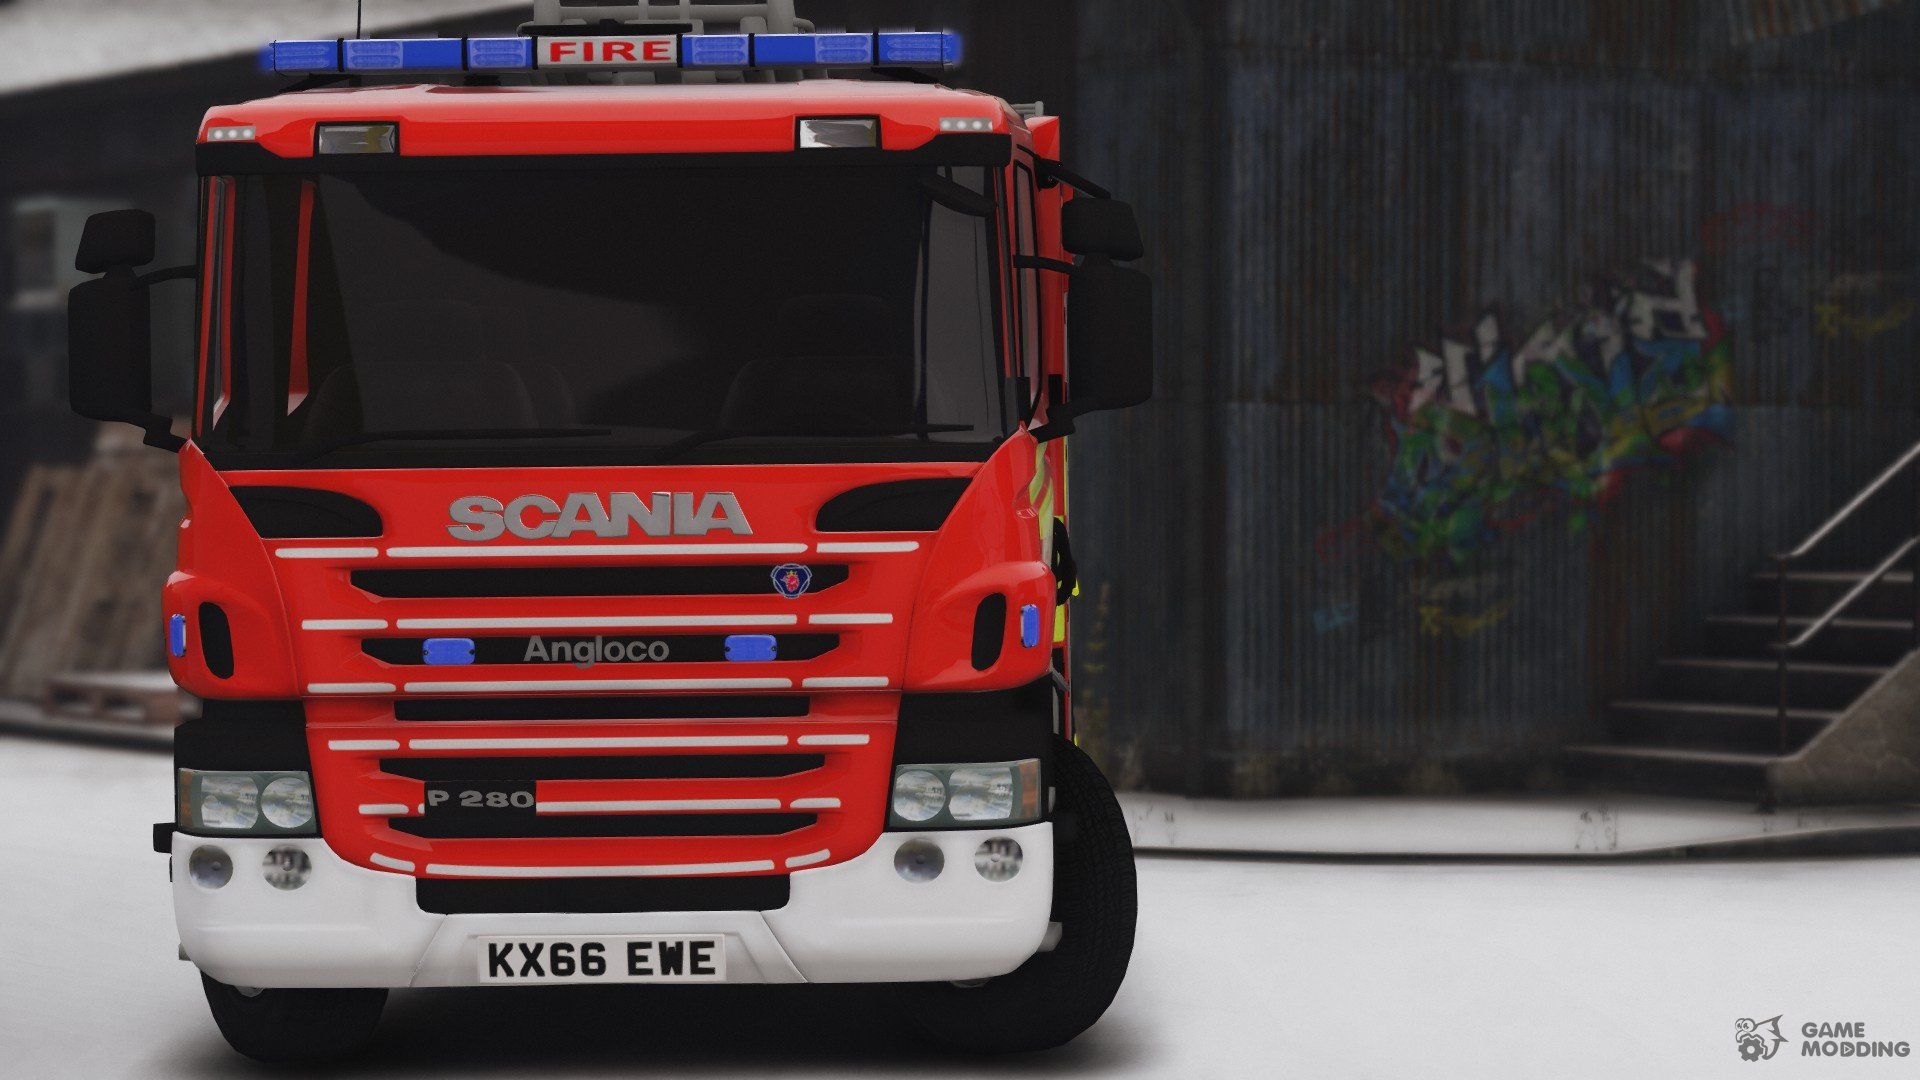 2015 Scania P280 Essex Fire And Rescue Angloco Appliance Els For Gta 5